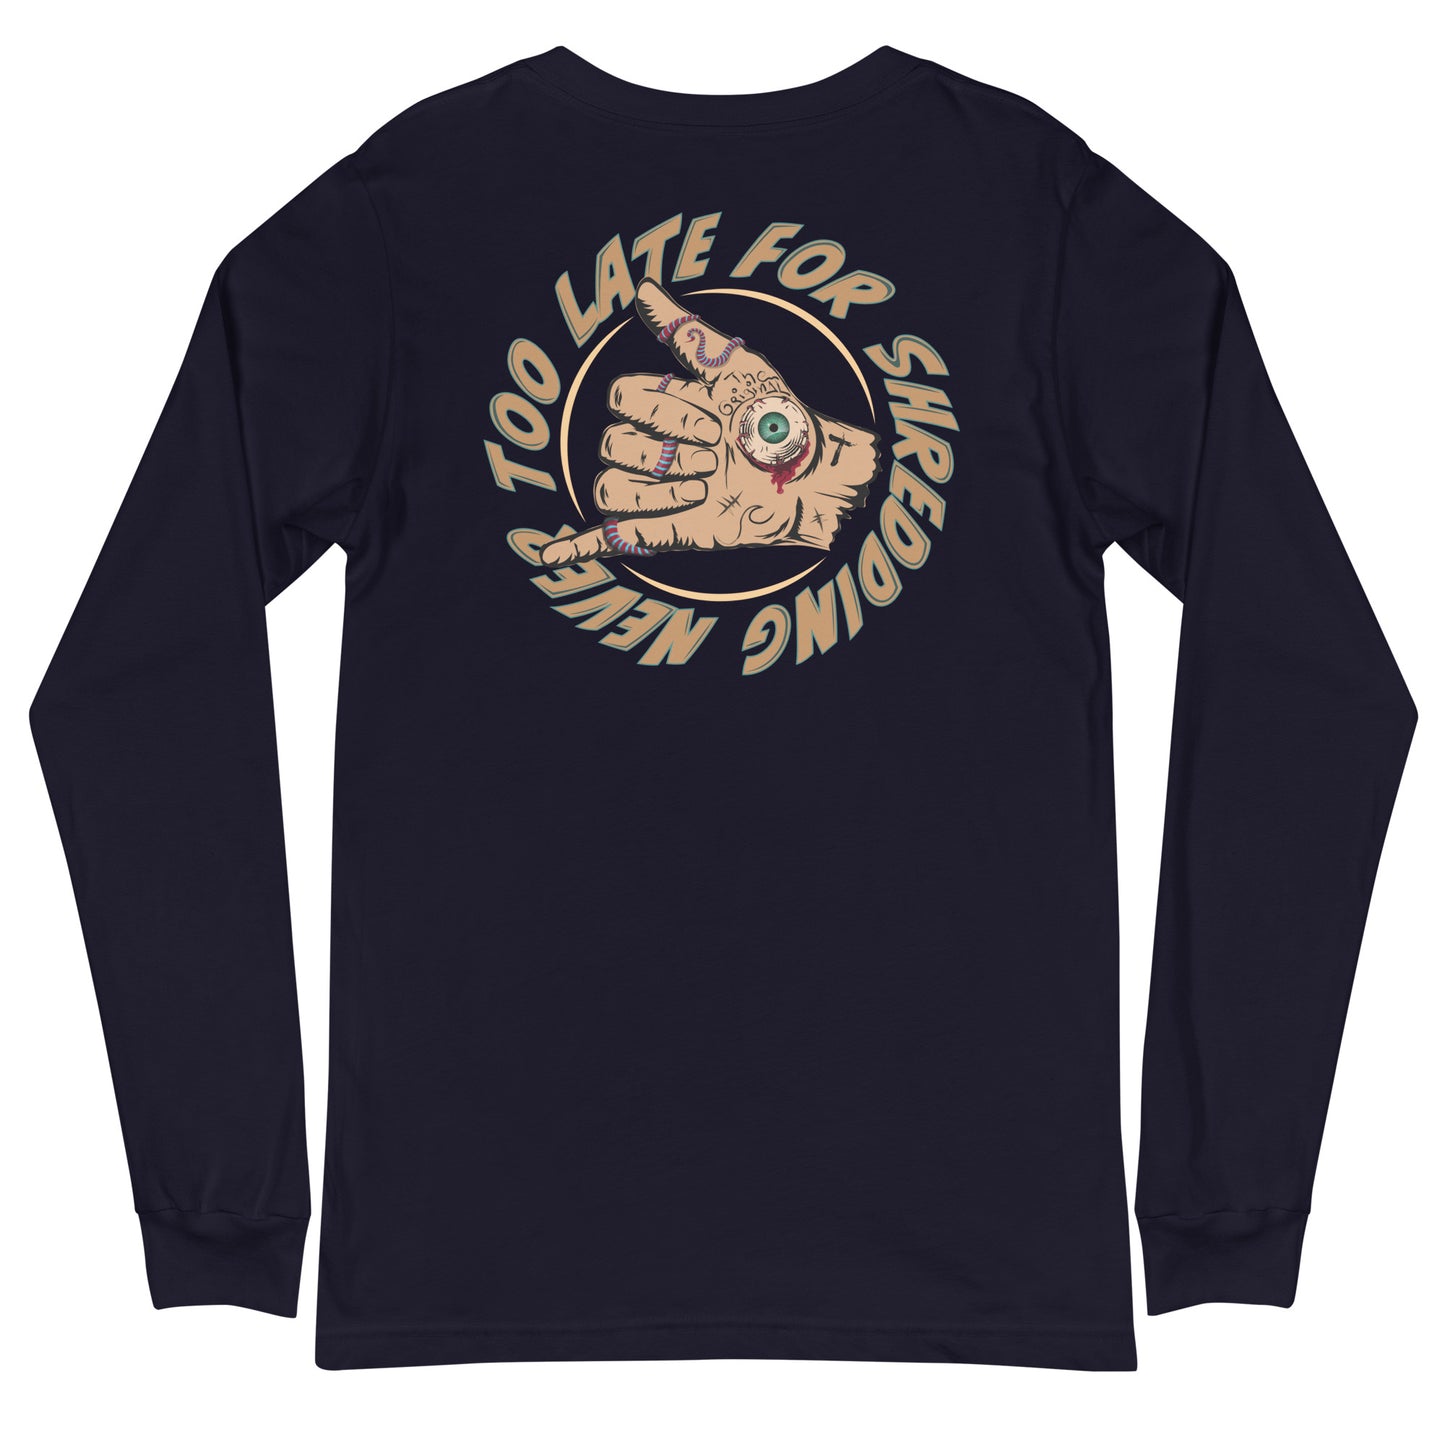 Long Sleeve surfing shaka hand Never Too Late style volcom, dos unisex couleur navy